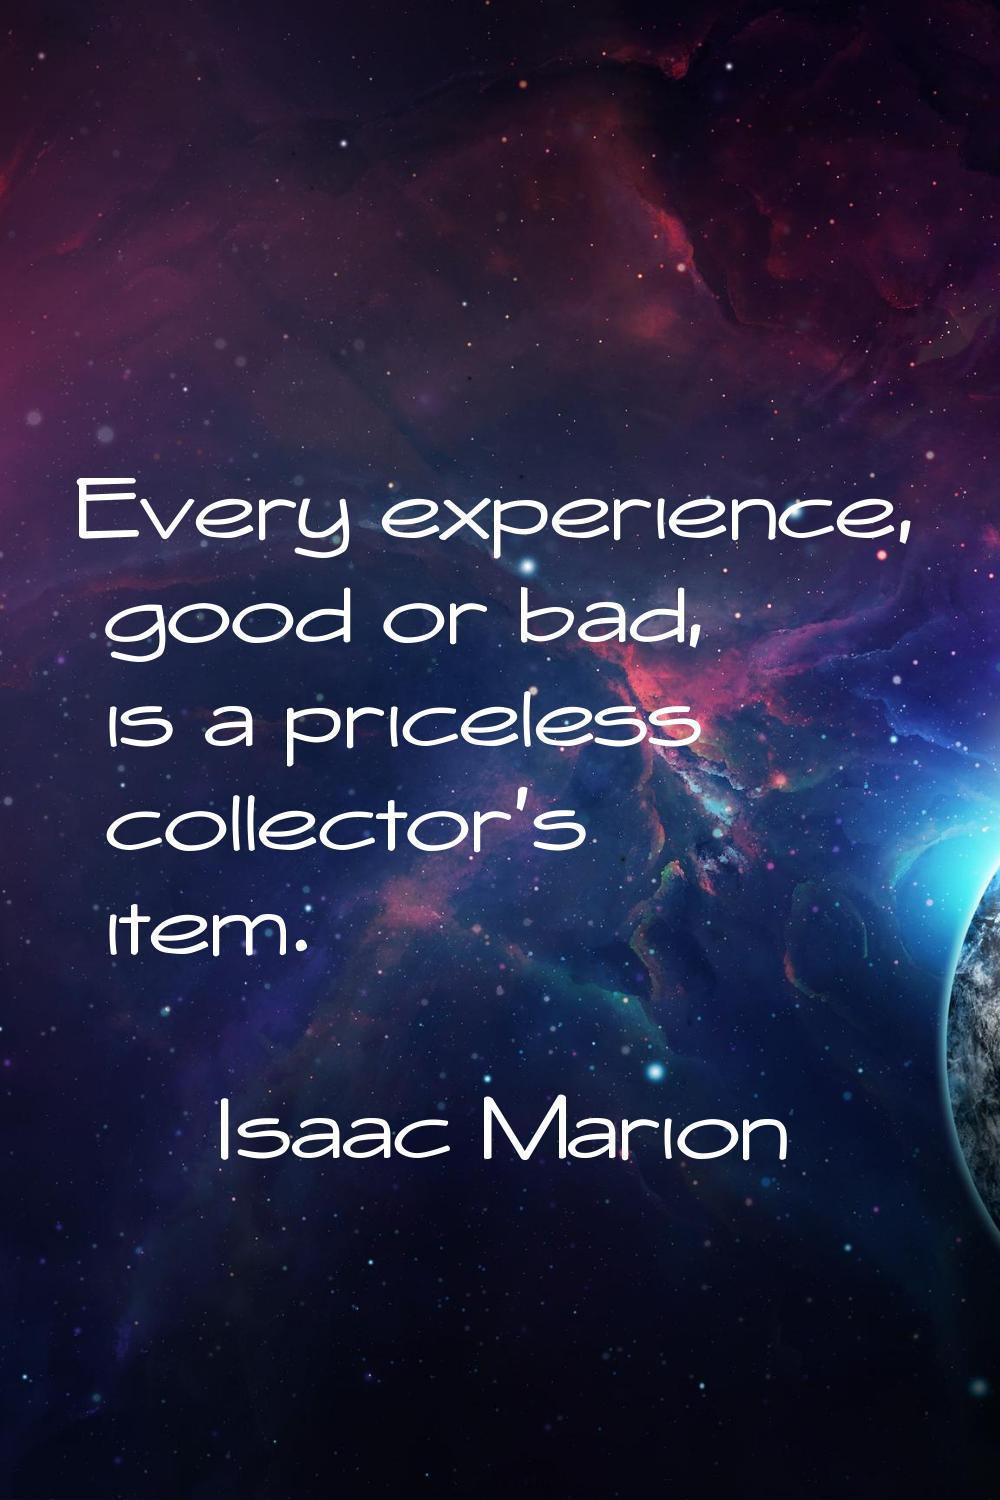 Every experience, good or bad, is a priceless collector's item.